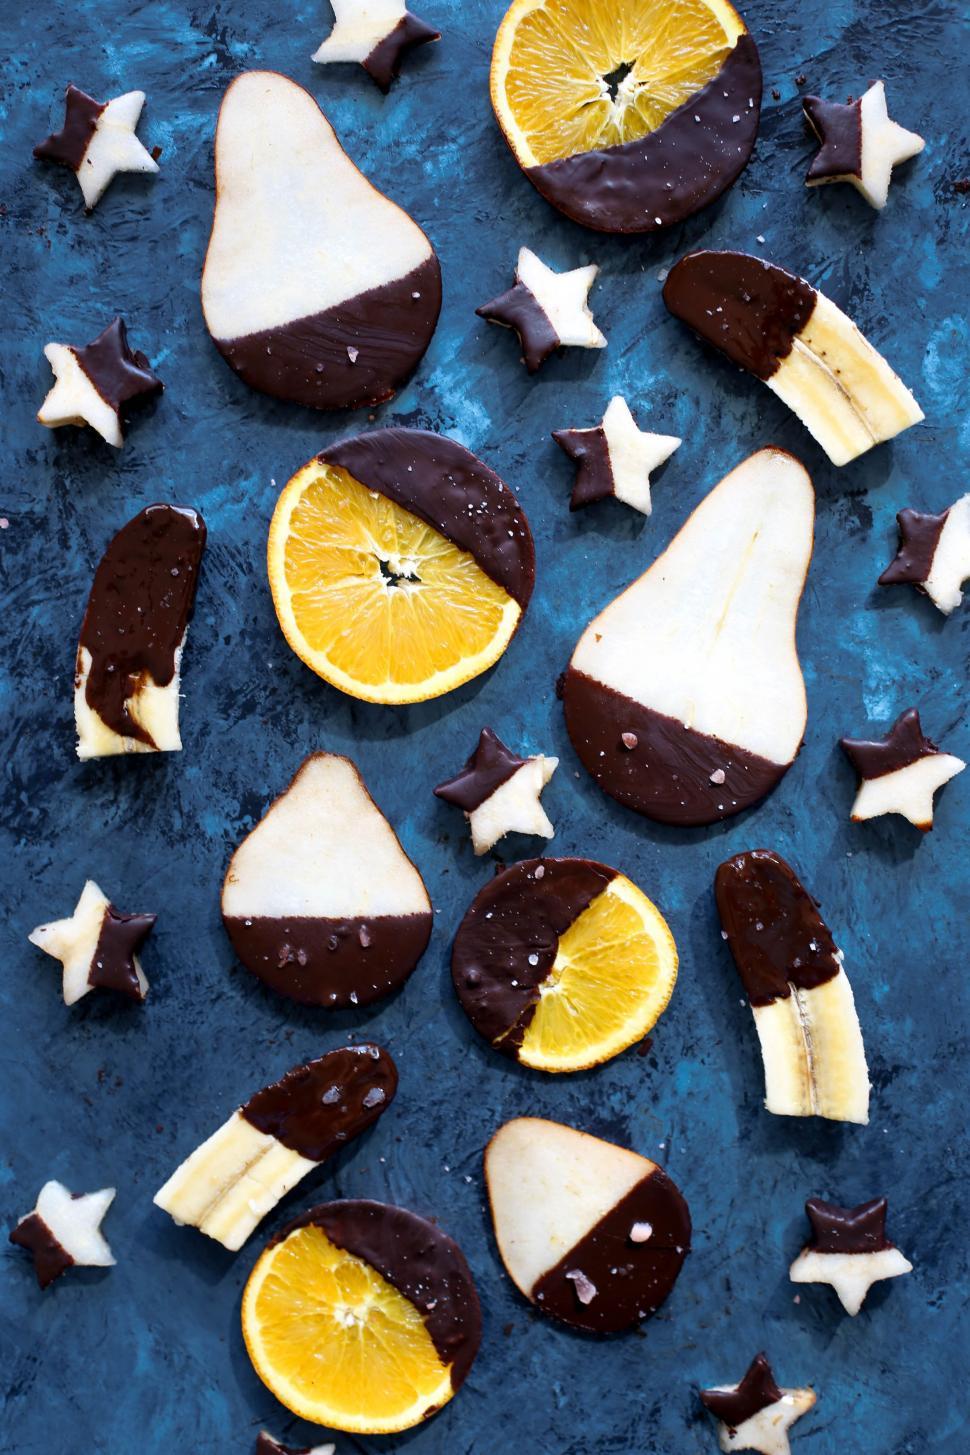 Free Image of Table With Cookies and Orange Slices 